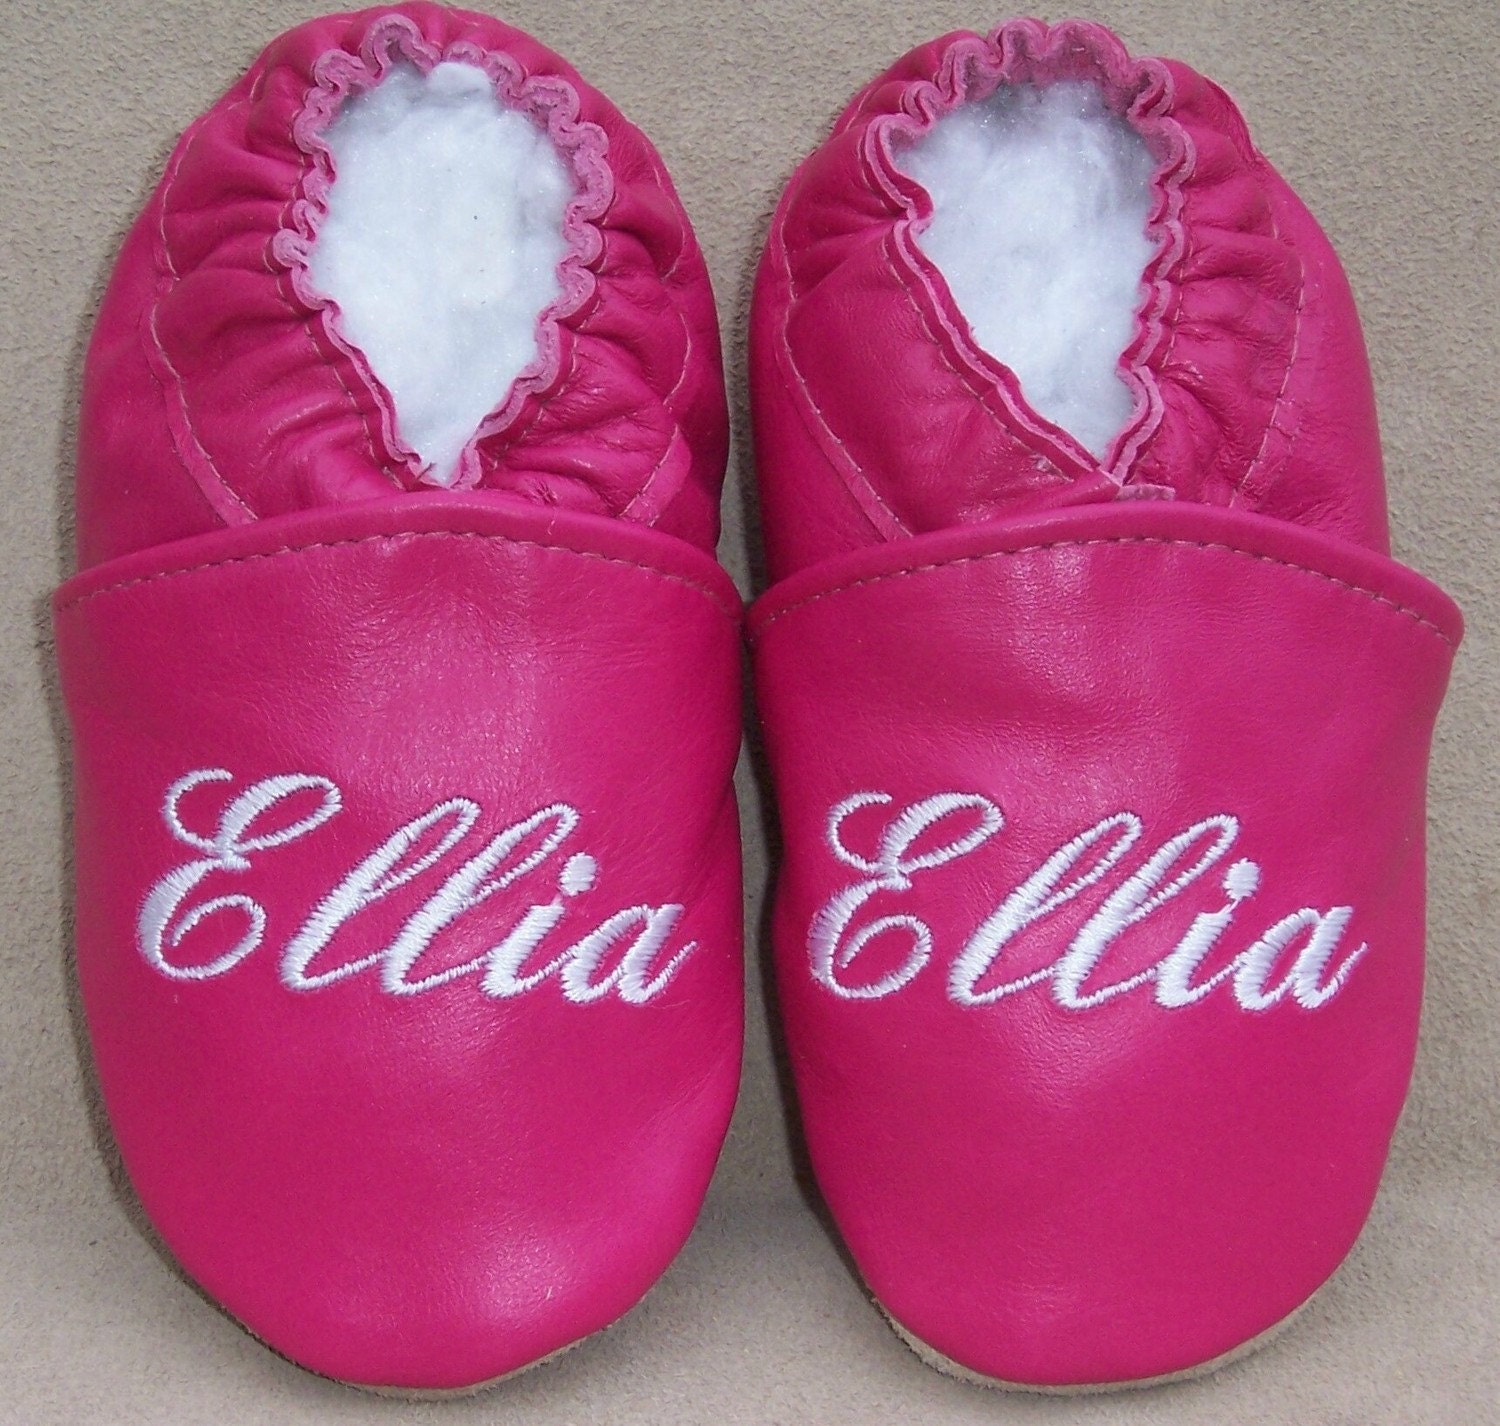 Design your own soft sole leather baby shoes Handmade in Canada